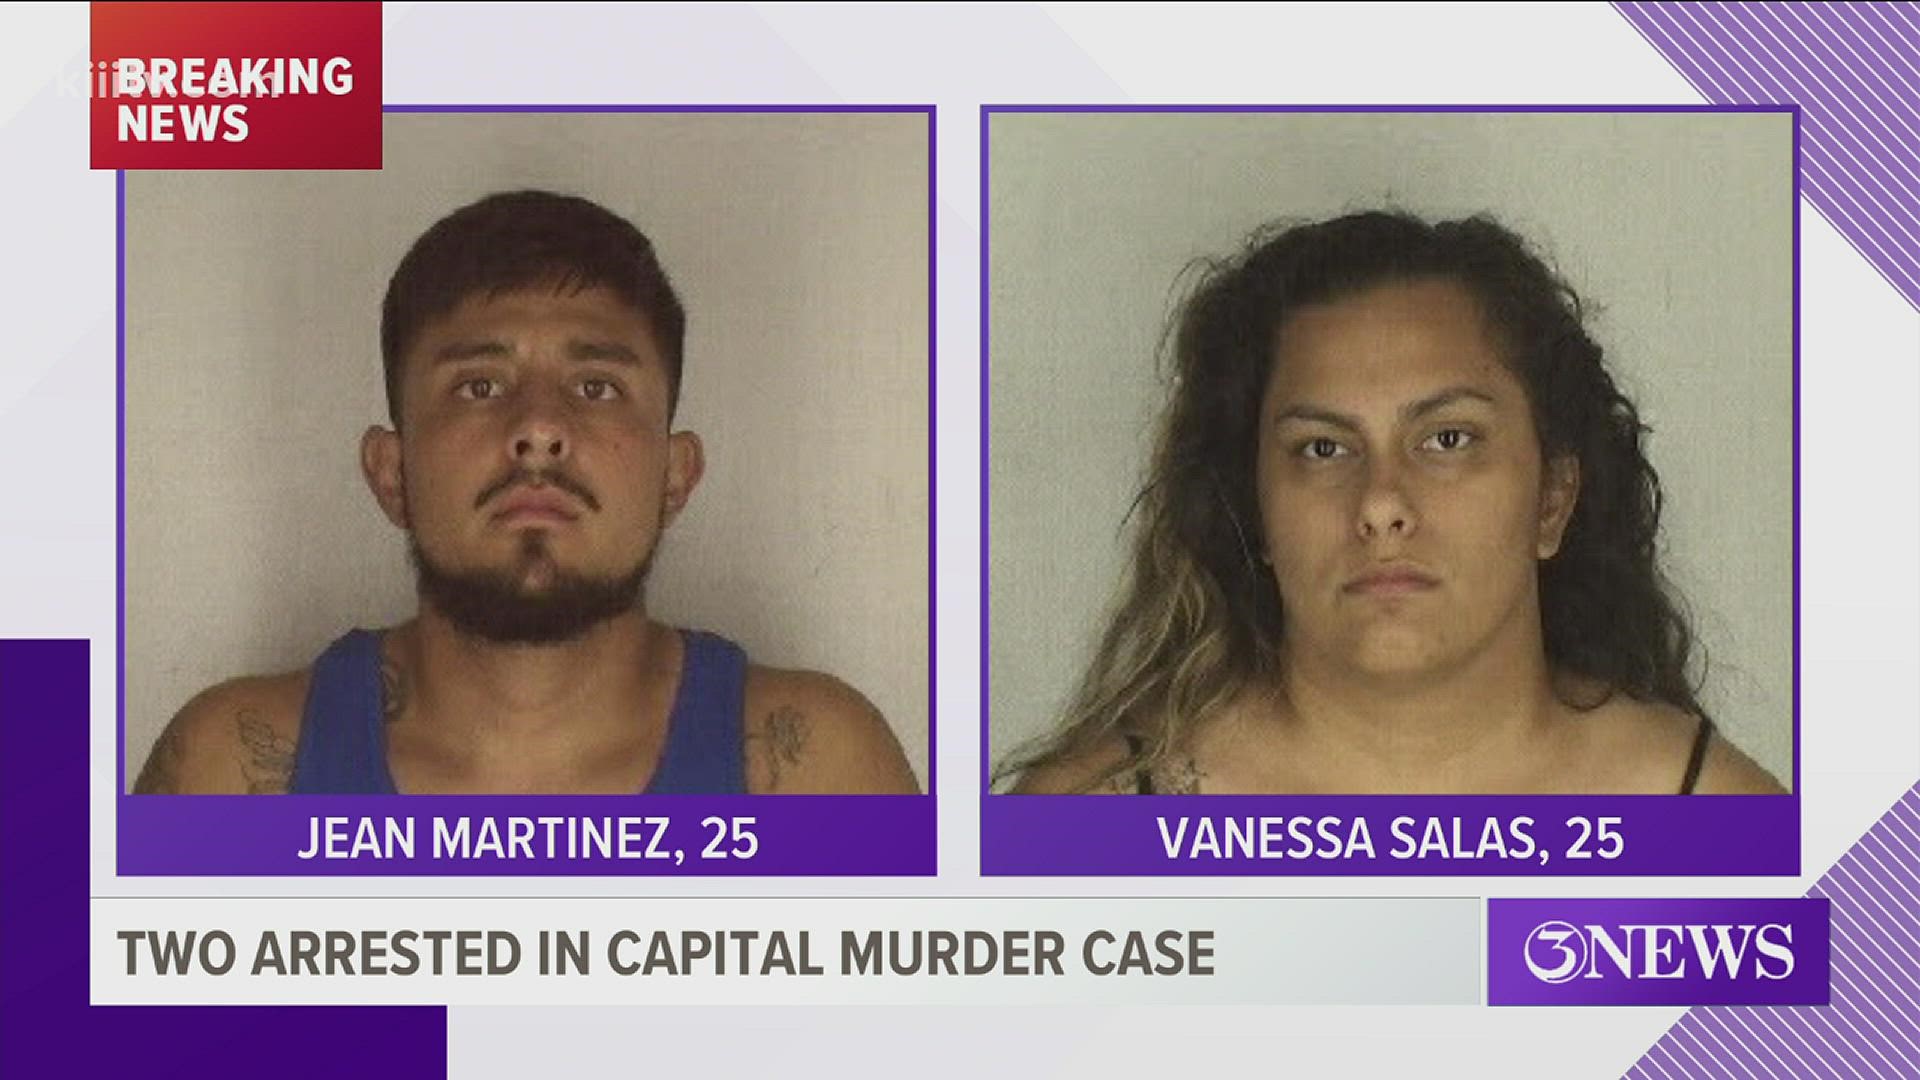 CCPD detectives were able to identify and secure warrants for the arrest of two suspects, 25-year-old Vanessa Salas and 25-year-old Jean Martinez.